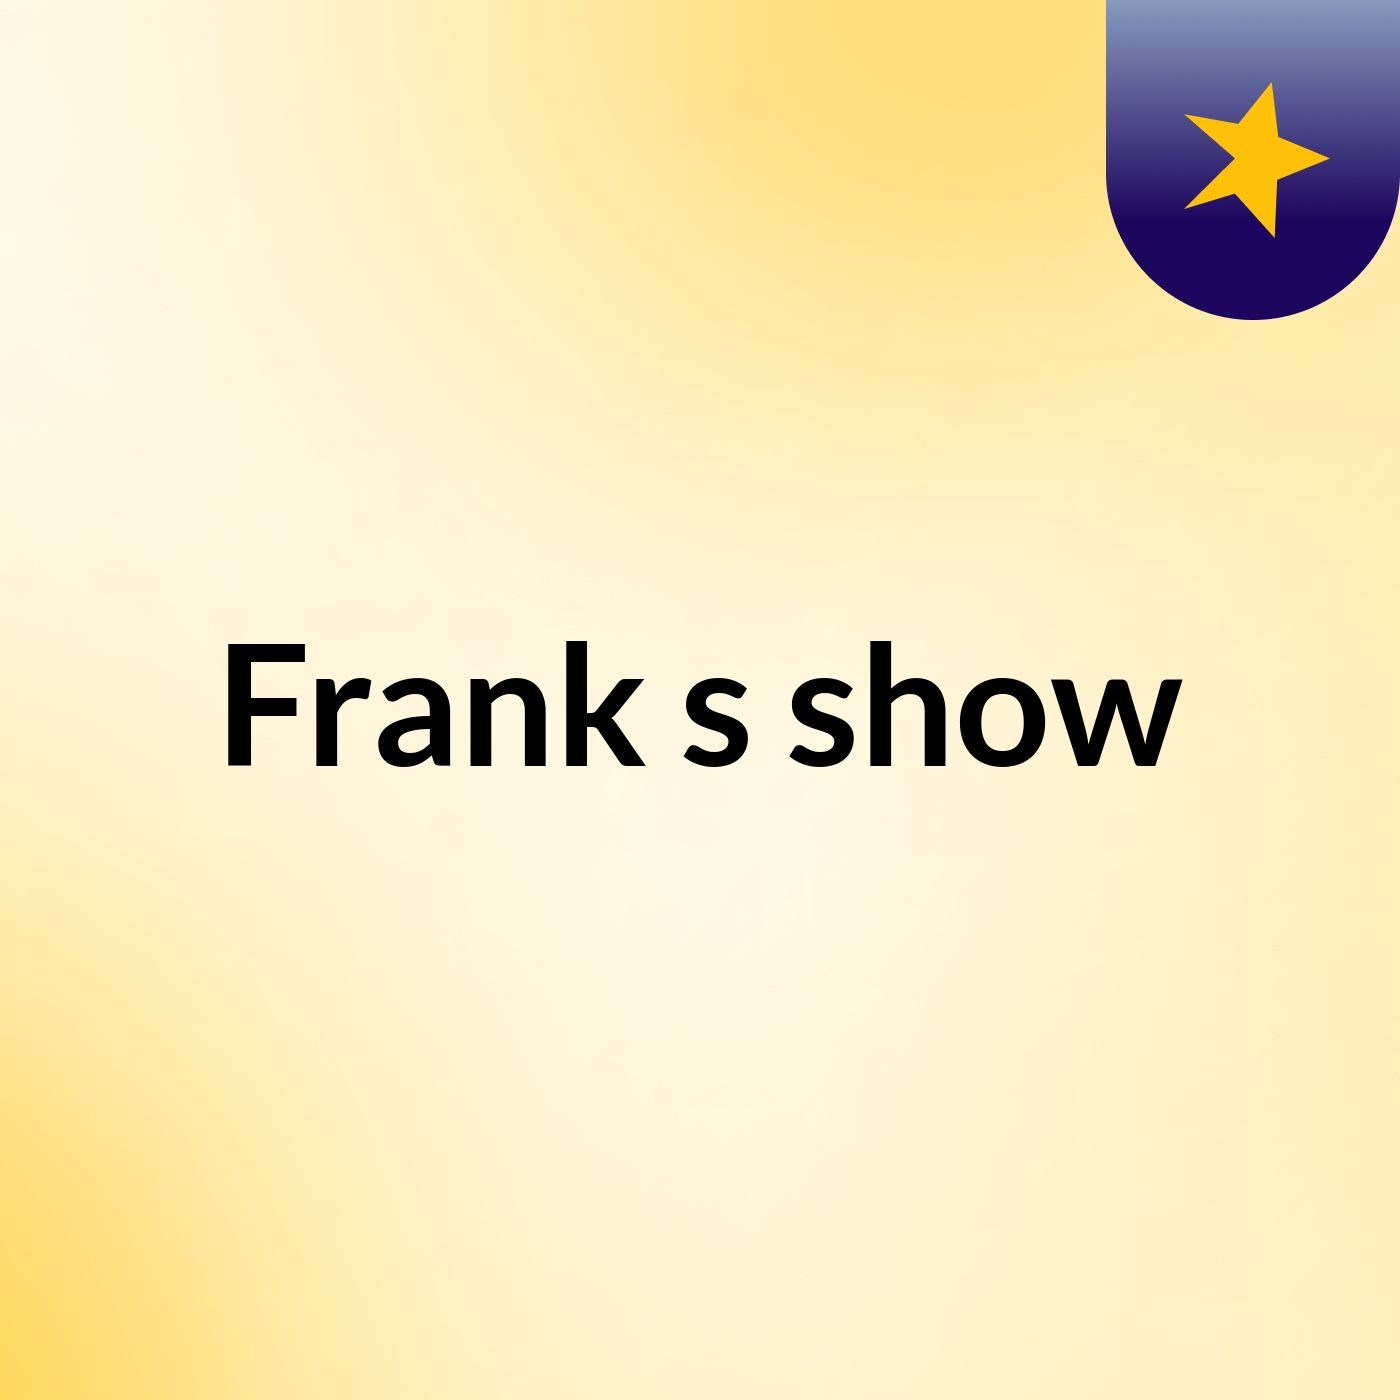 Frank's show